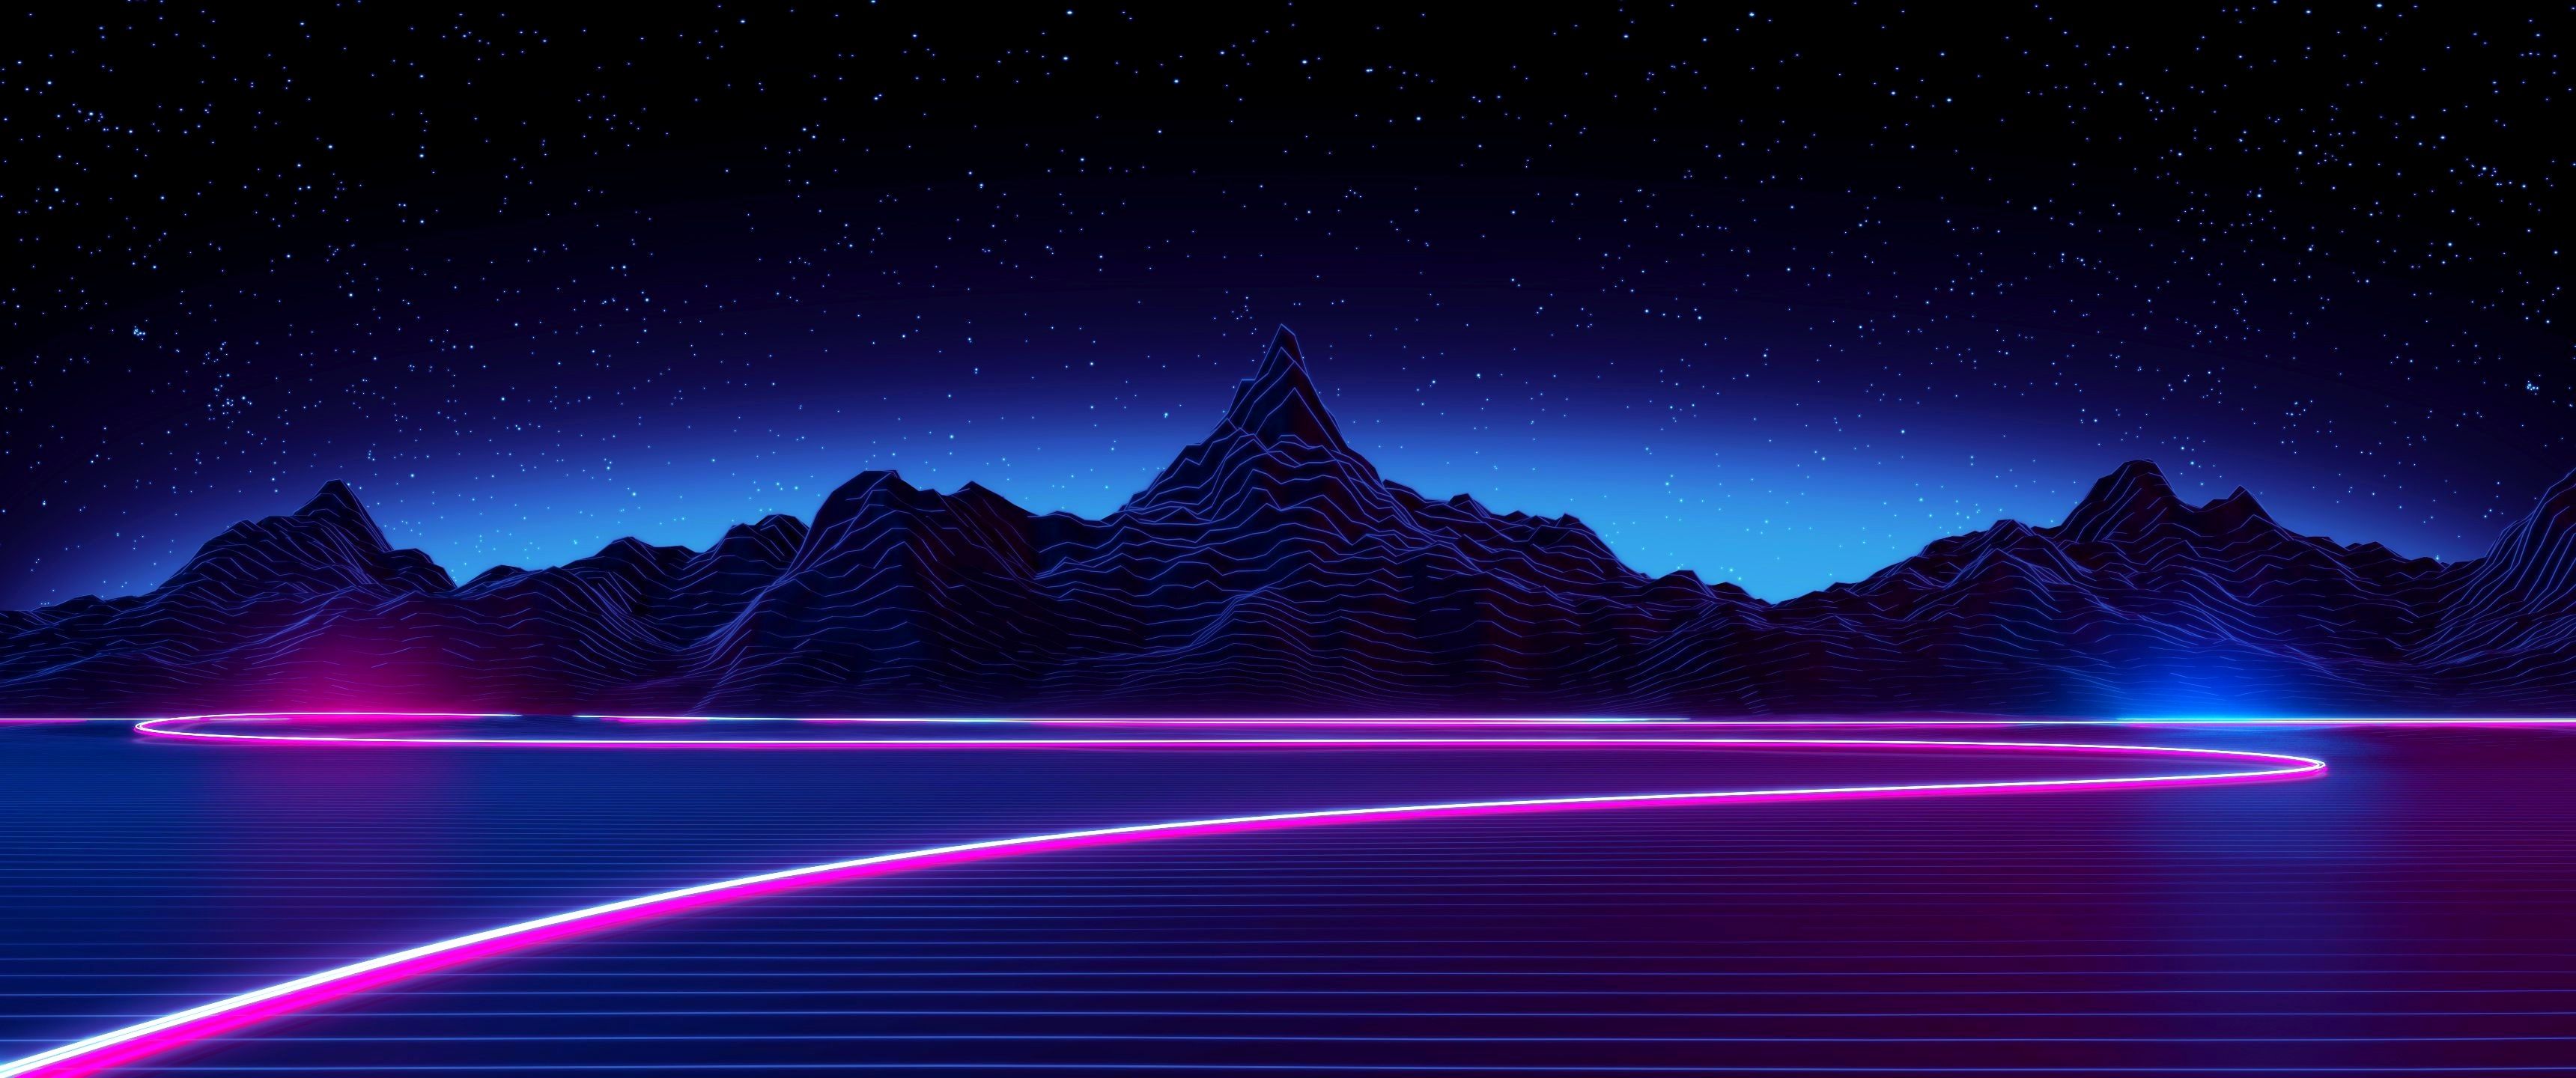 Retro Neon Background Inspirational Synthwave City Retro Neon 4k HD Artist 4k Wallpaper Background S and Inspiration of The Hudson